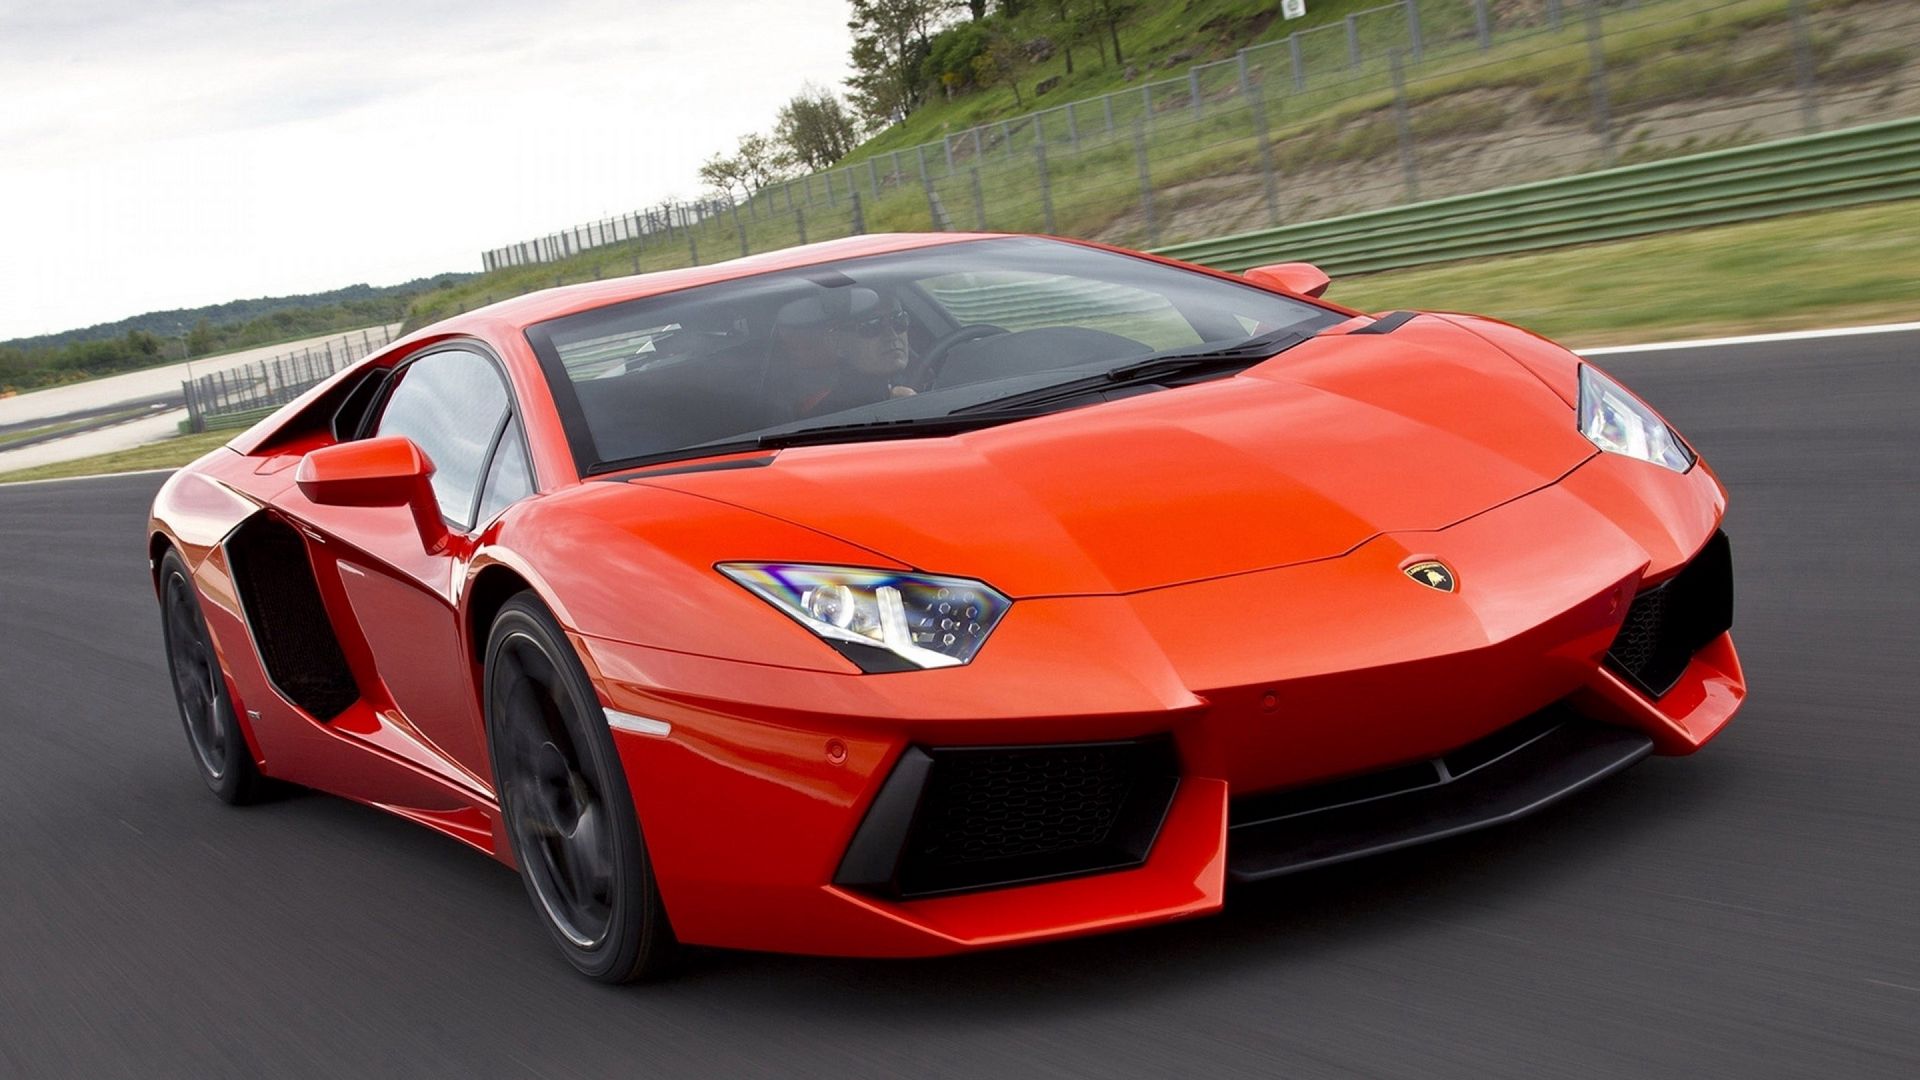 The Wallpapers Related to Lamborghini Aventador, Style Cars